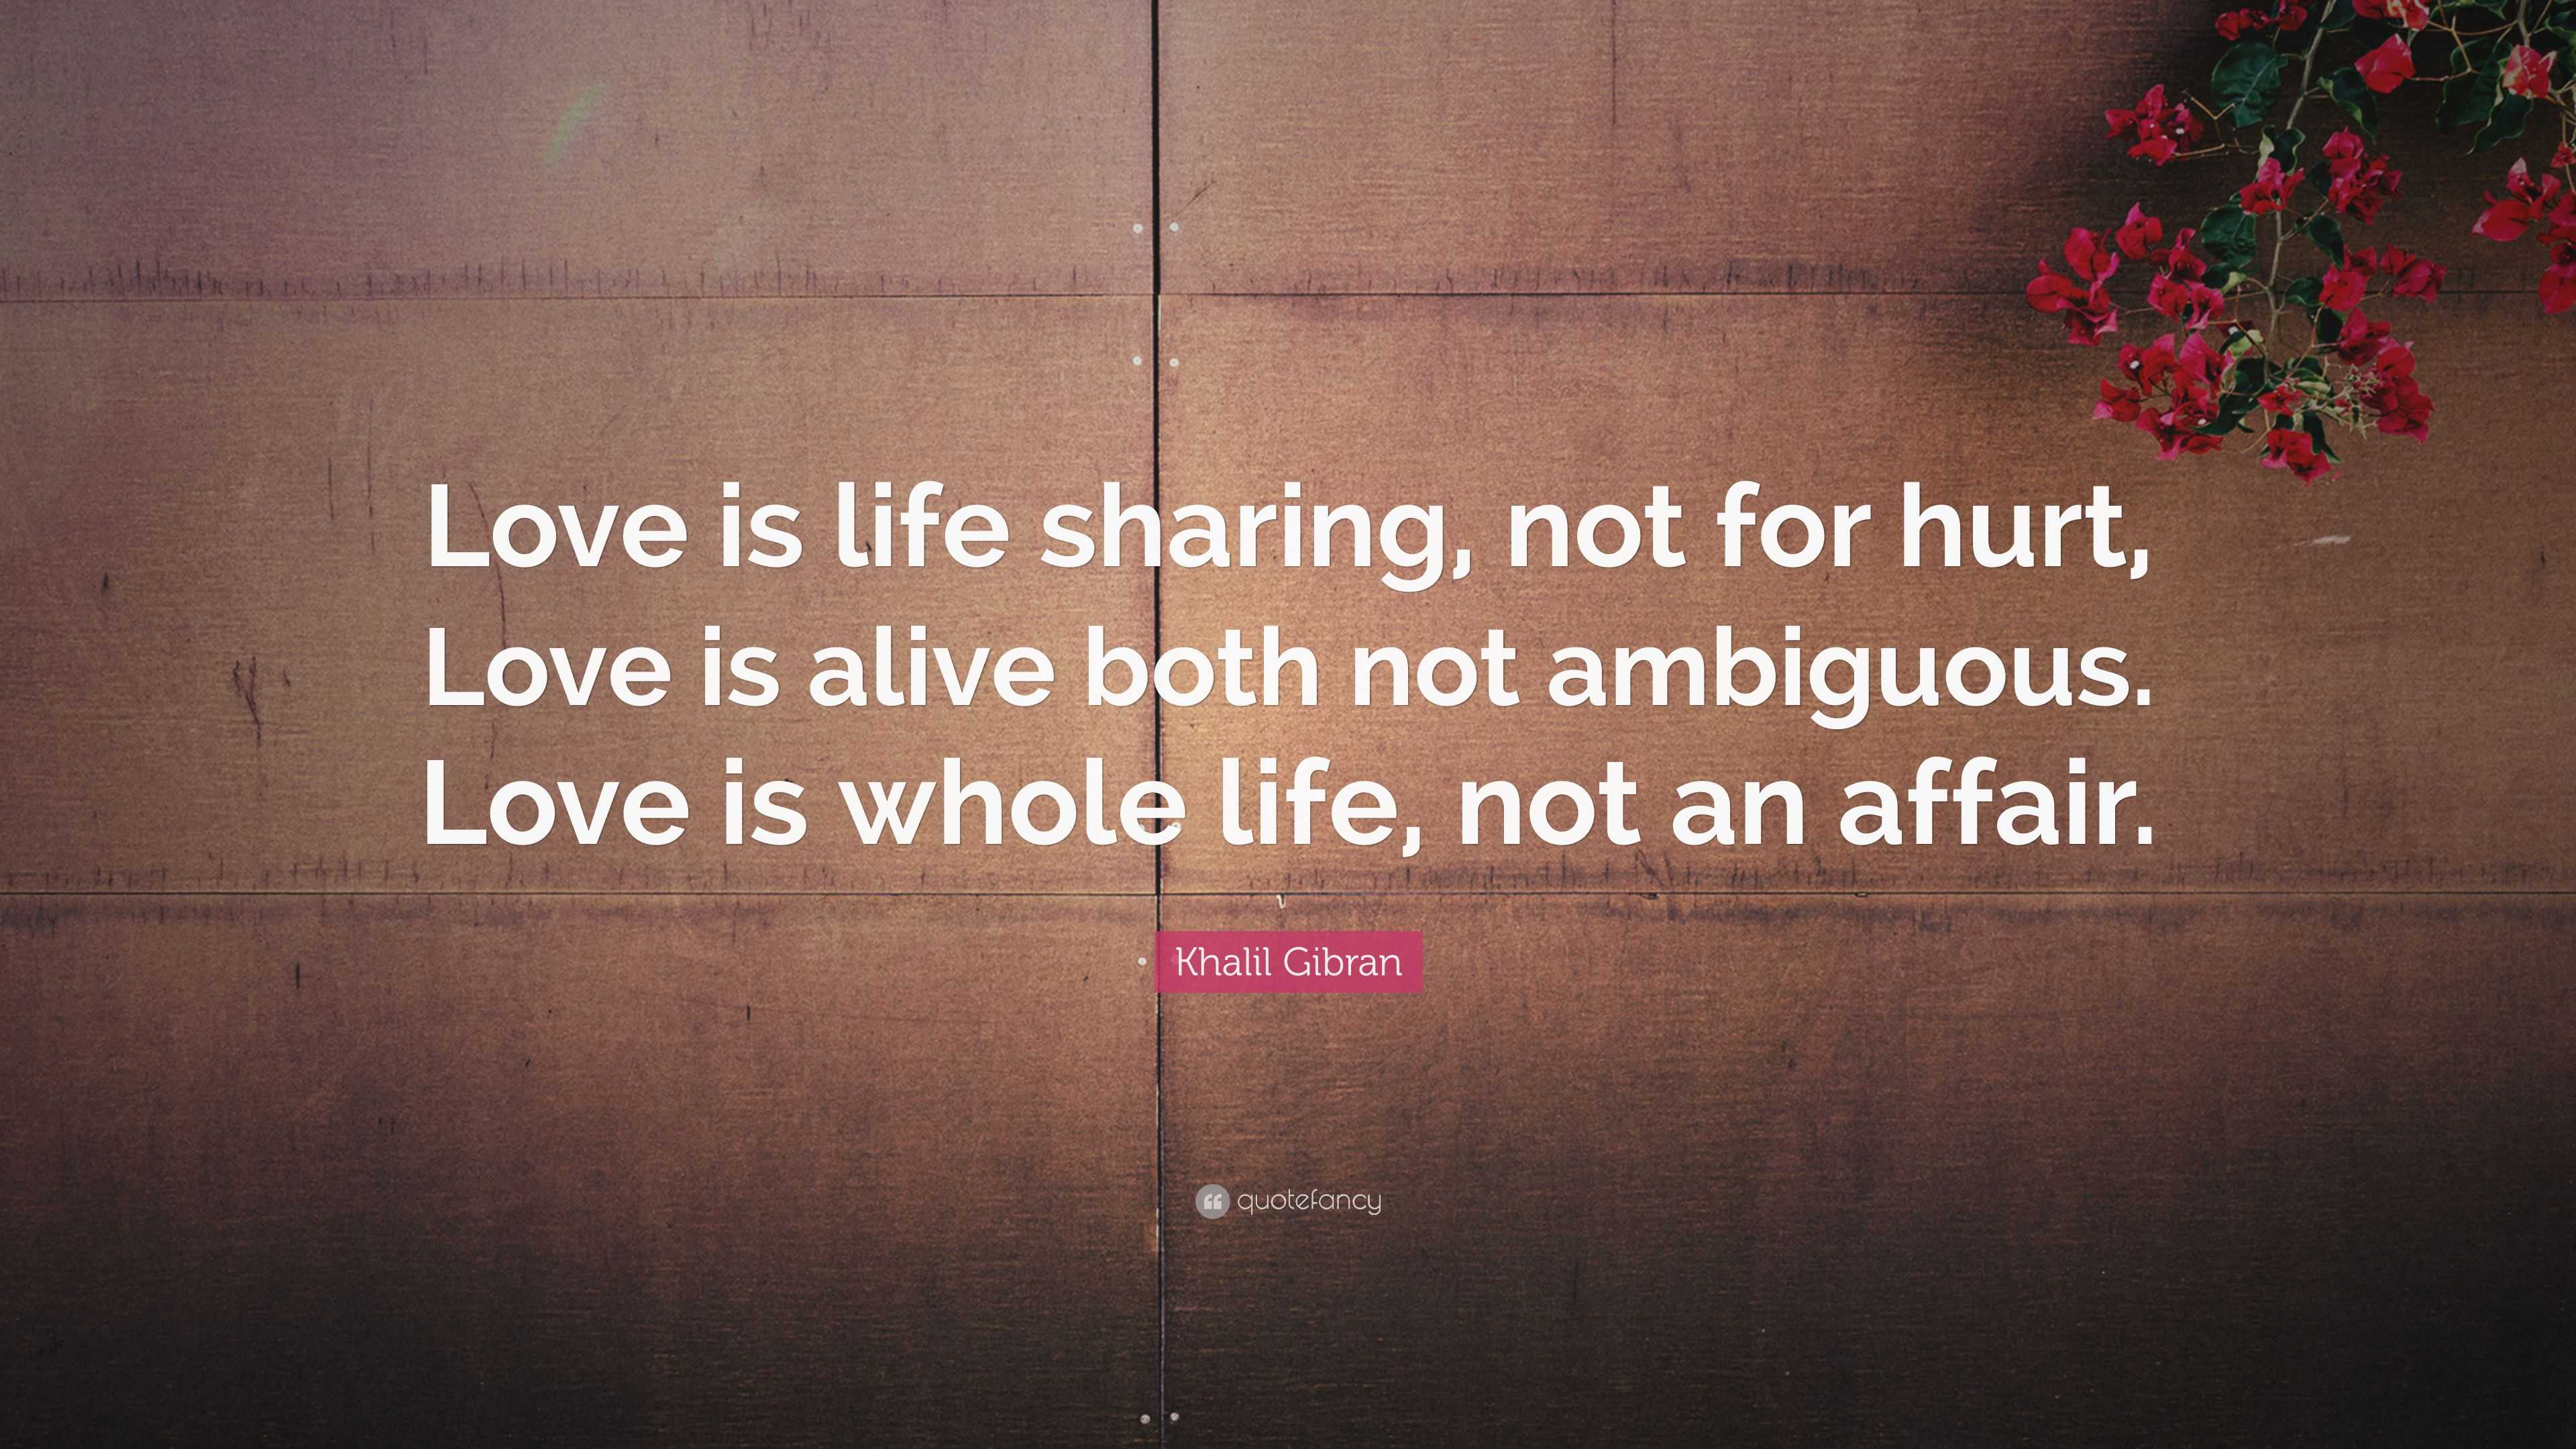 Khalil Gibran Quote: “Love is life sharing, not for hurt, Love is alive ...